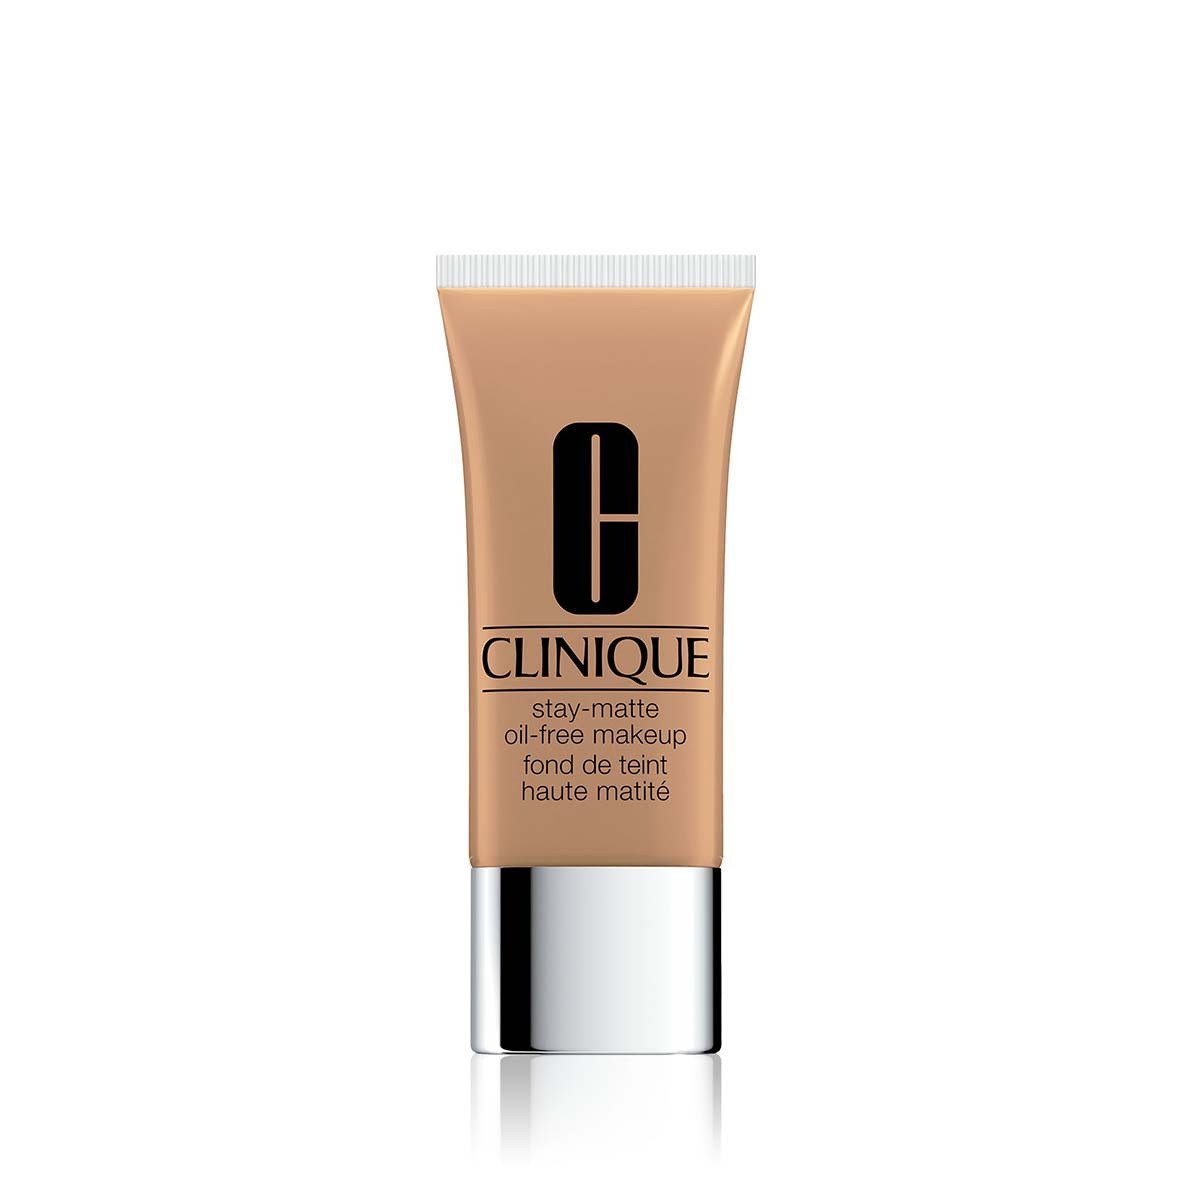 Clinique stay-matte oil-free make-up - cn 70 vanilla  30 ml, CN 70 VANILLA, large image number 0